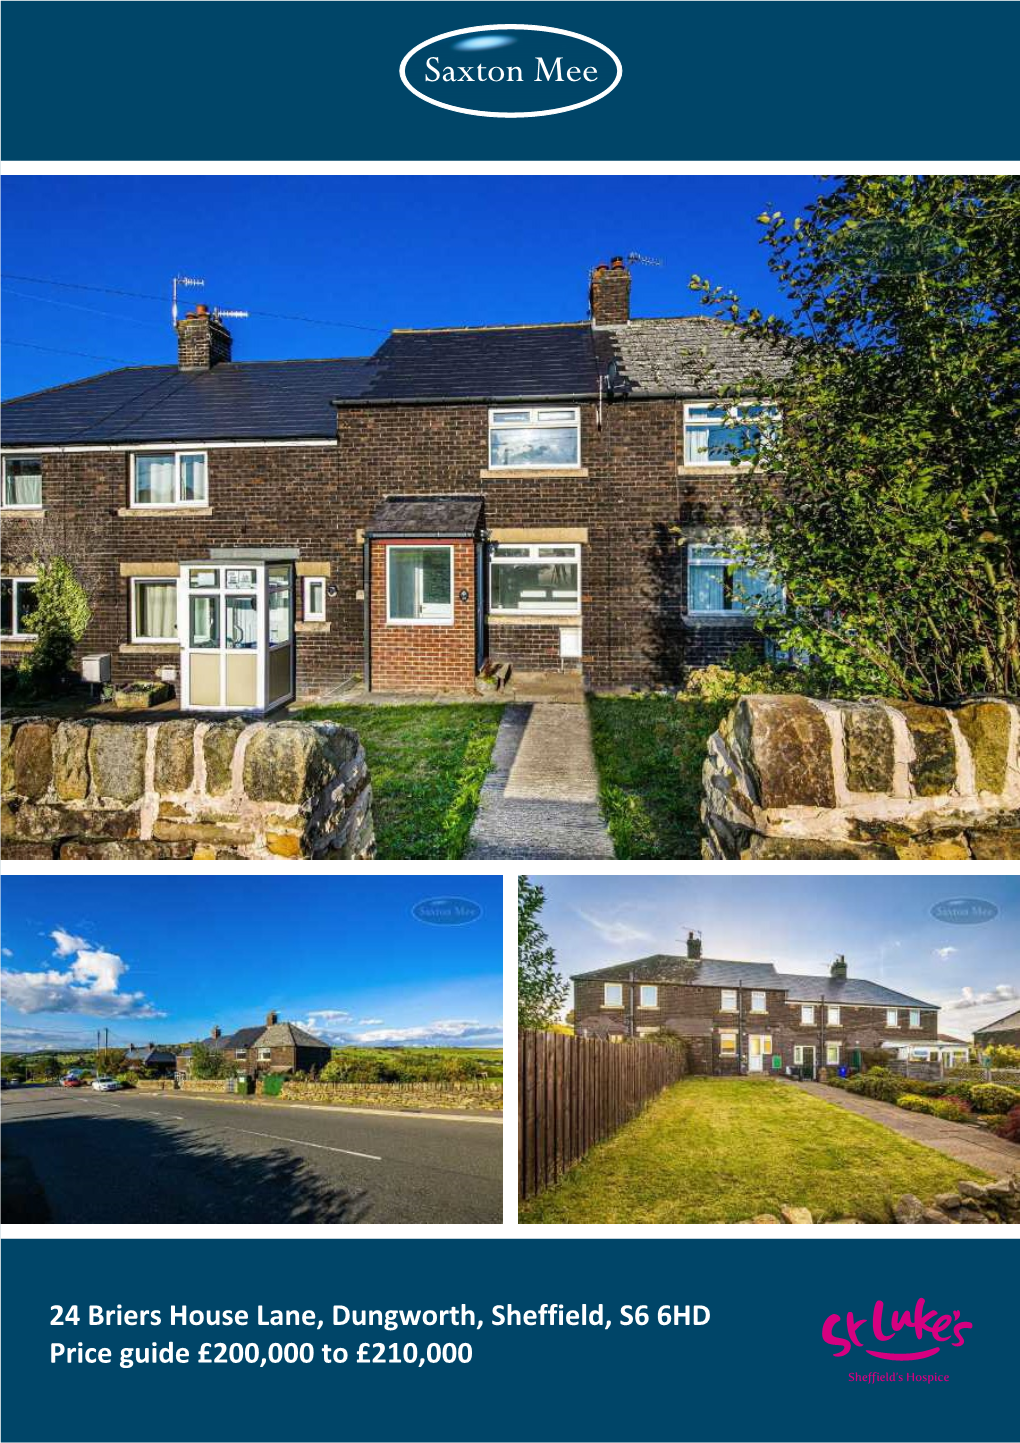 24 Briers House Lane, Dungworth, Sheffield, S6 6HD Price Guide £200,000 to £210,000 She Ield’S Hospice 24 Briers House Lane Dungworth Price Guide £200,000 to £210,000